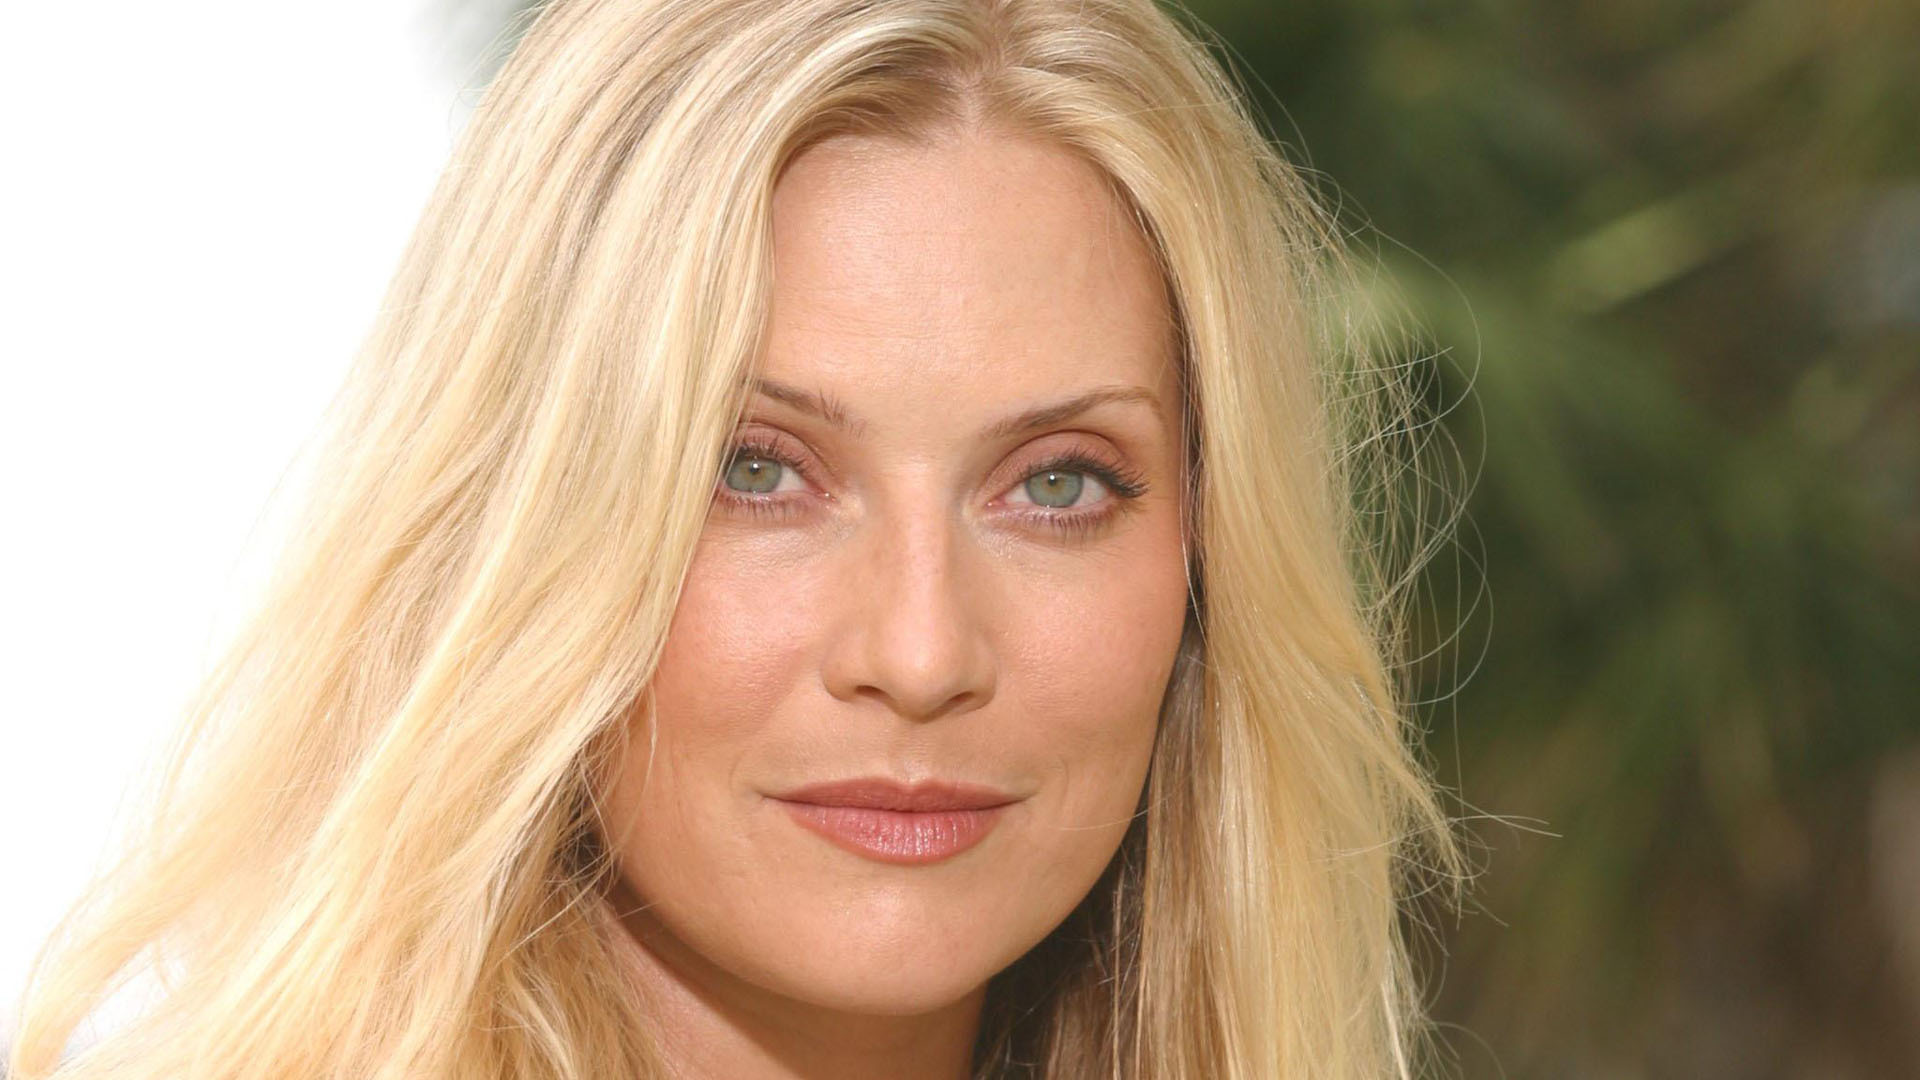 Emily Procter Wallpapers Image Photos Pictures Backgrounds.